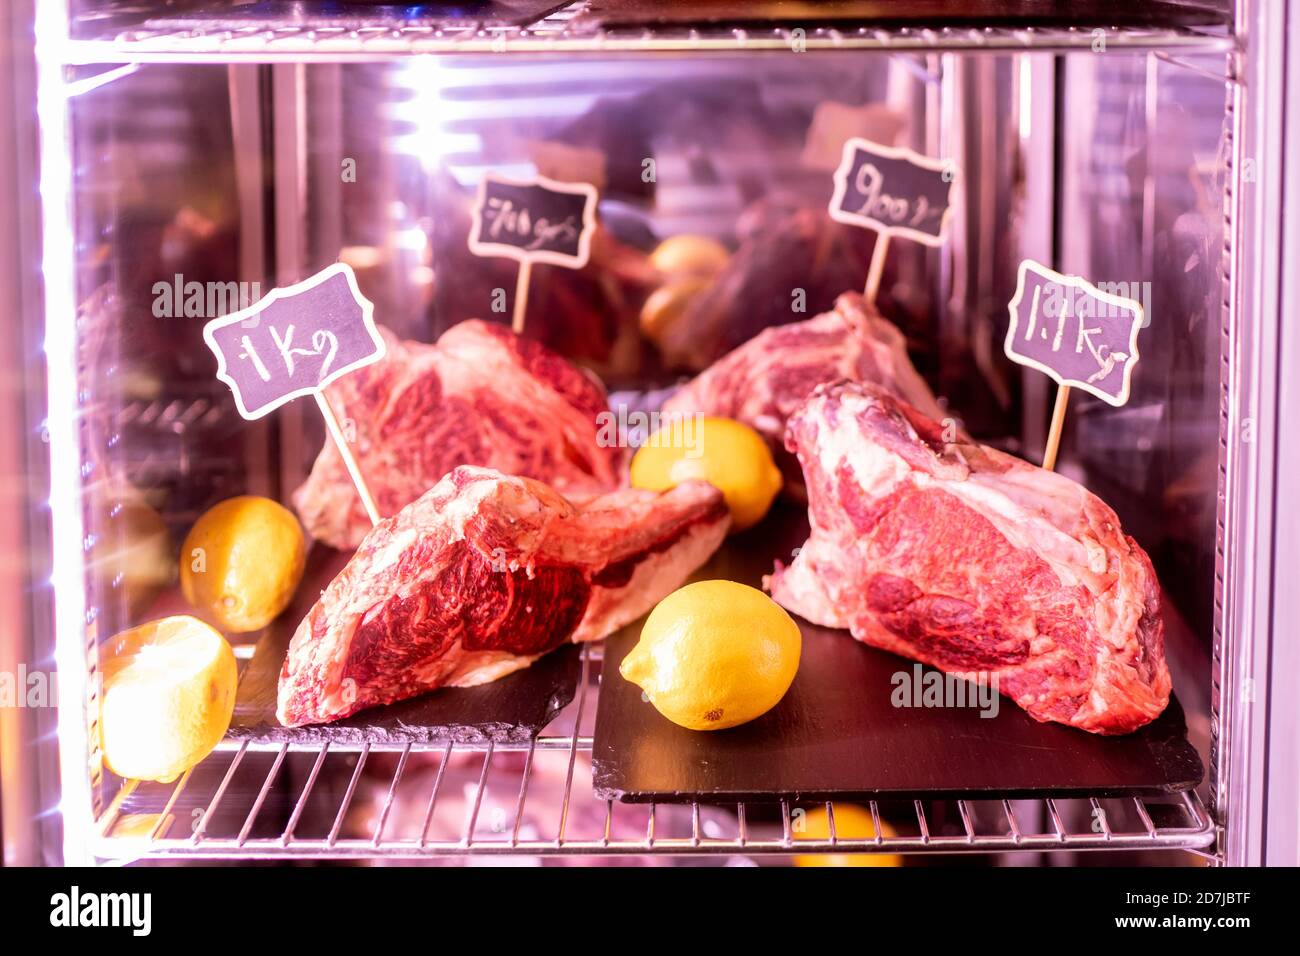 Meat and lemons in refrigerator Stock Photo